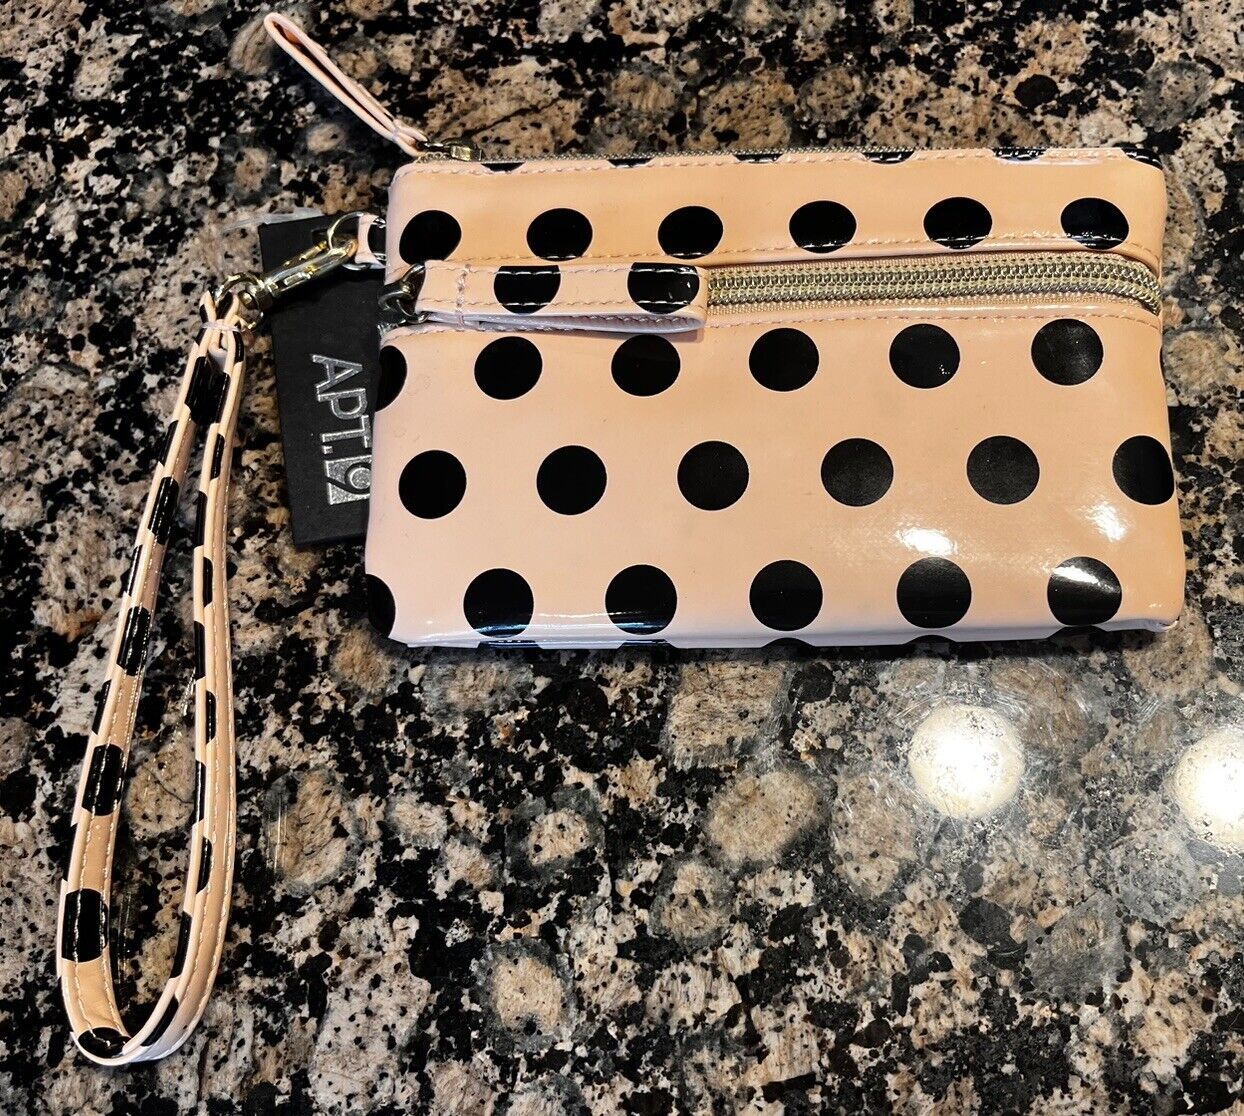 New NWT Small Wristlet Pink With Polka Dots Wristlet Wallet NWT APT 9 Cute